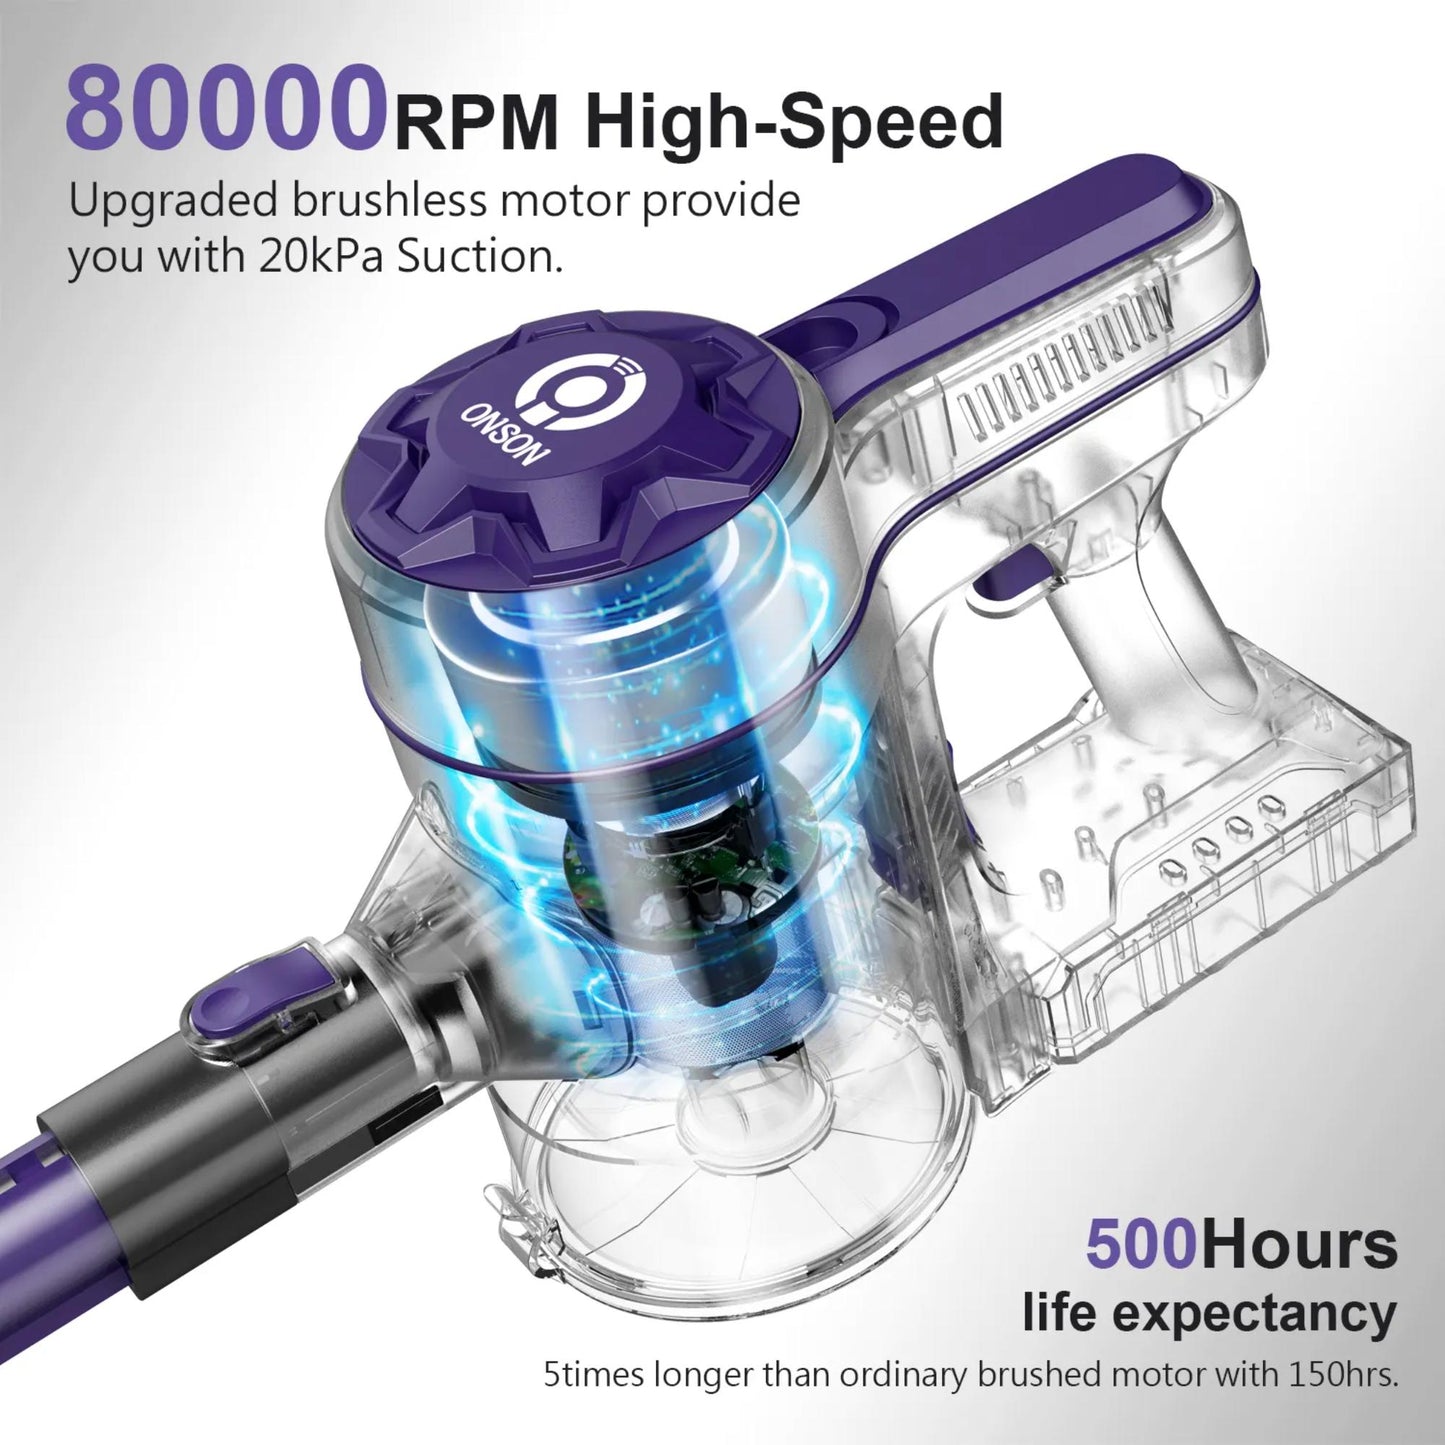 ONSON A10 Stick Vacuum Cleaner with 80000 RPM High-Speed. | Blue Chilli Electronics.